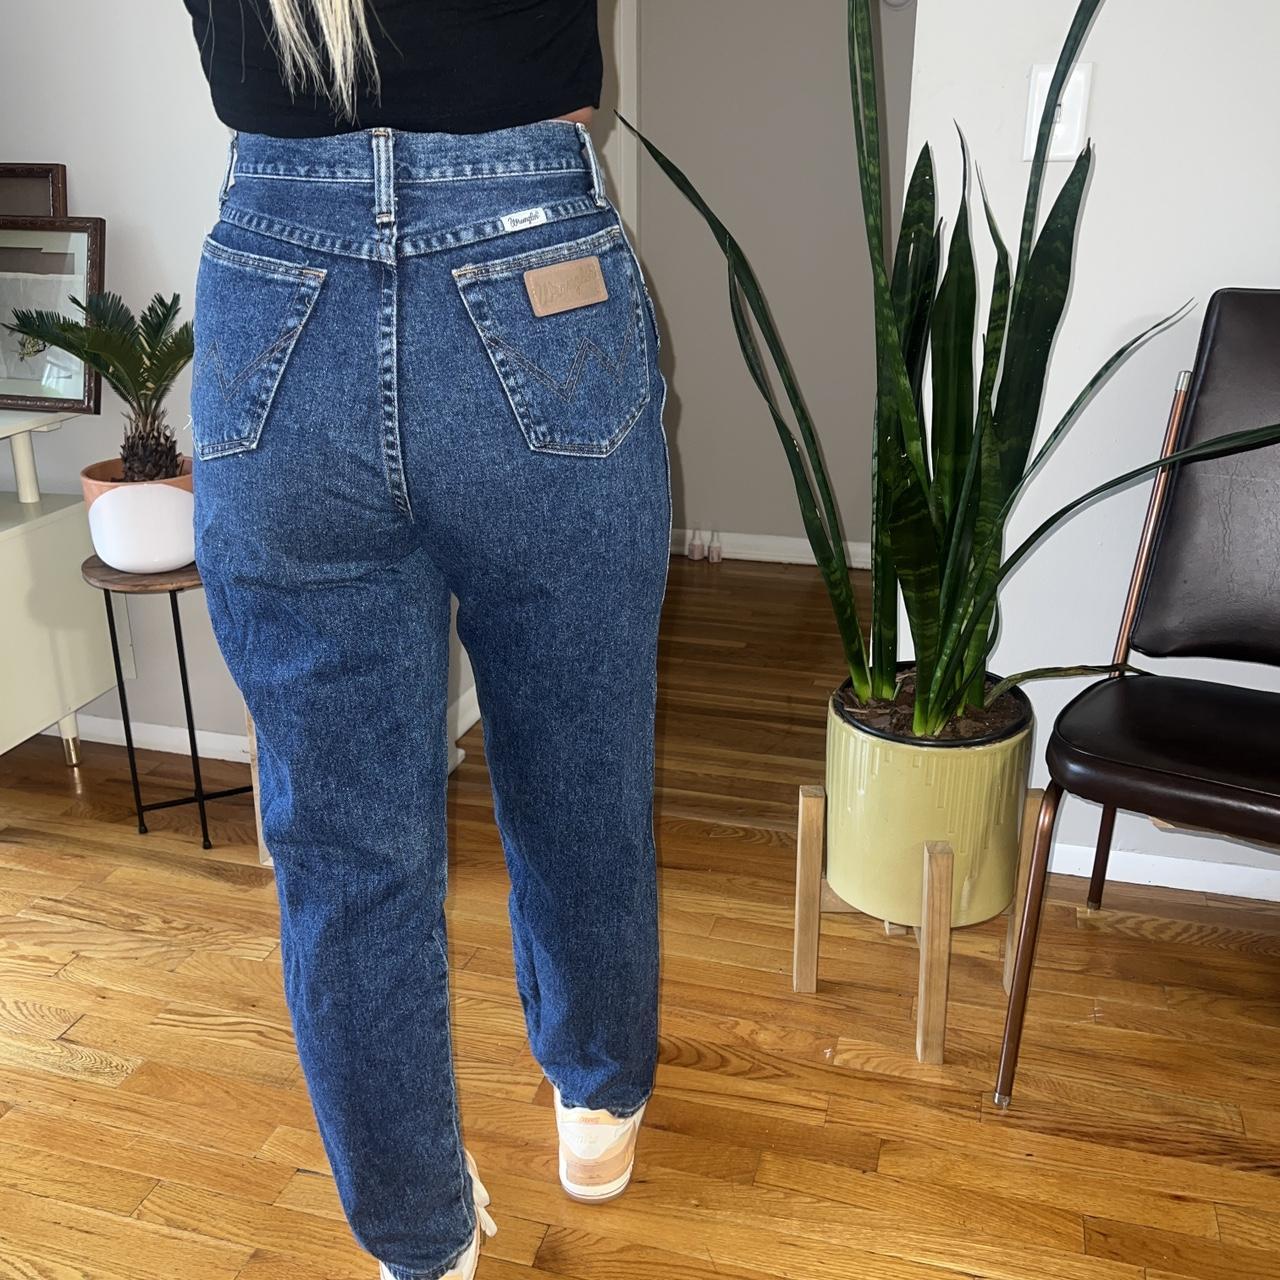 Vintage Wrangler Jeans All Sizes High Waisted Jeans 